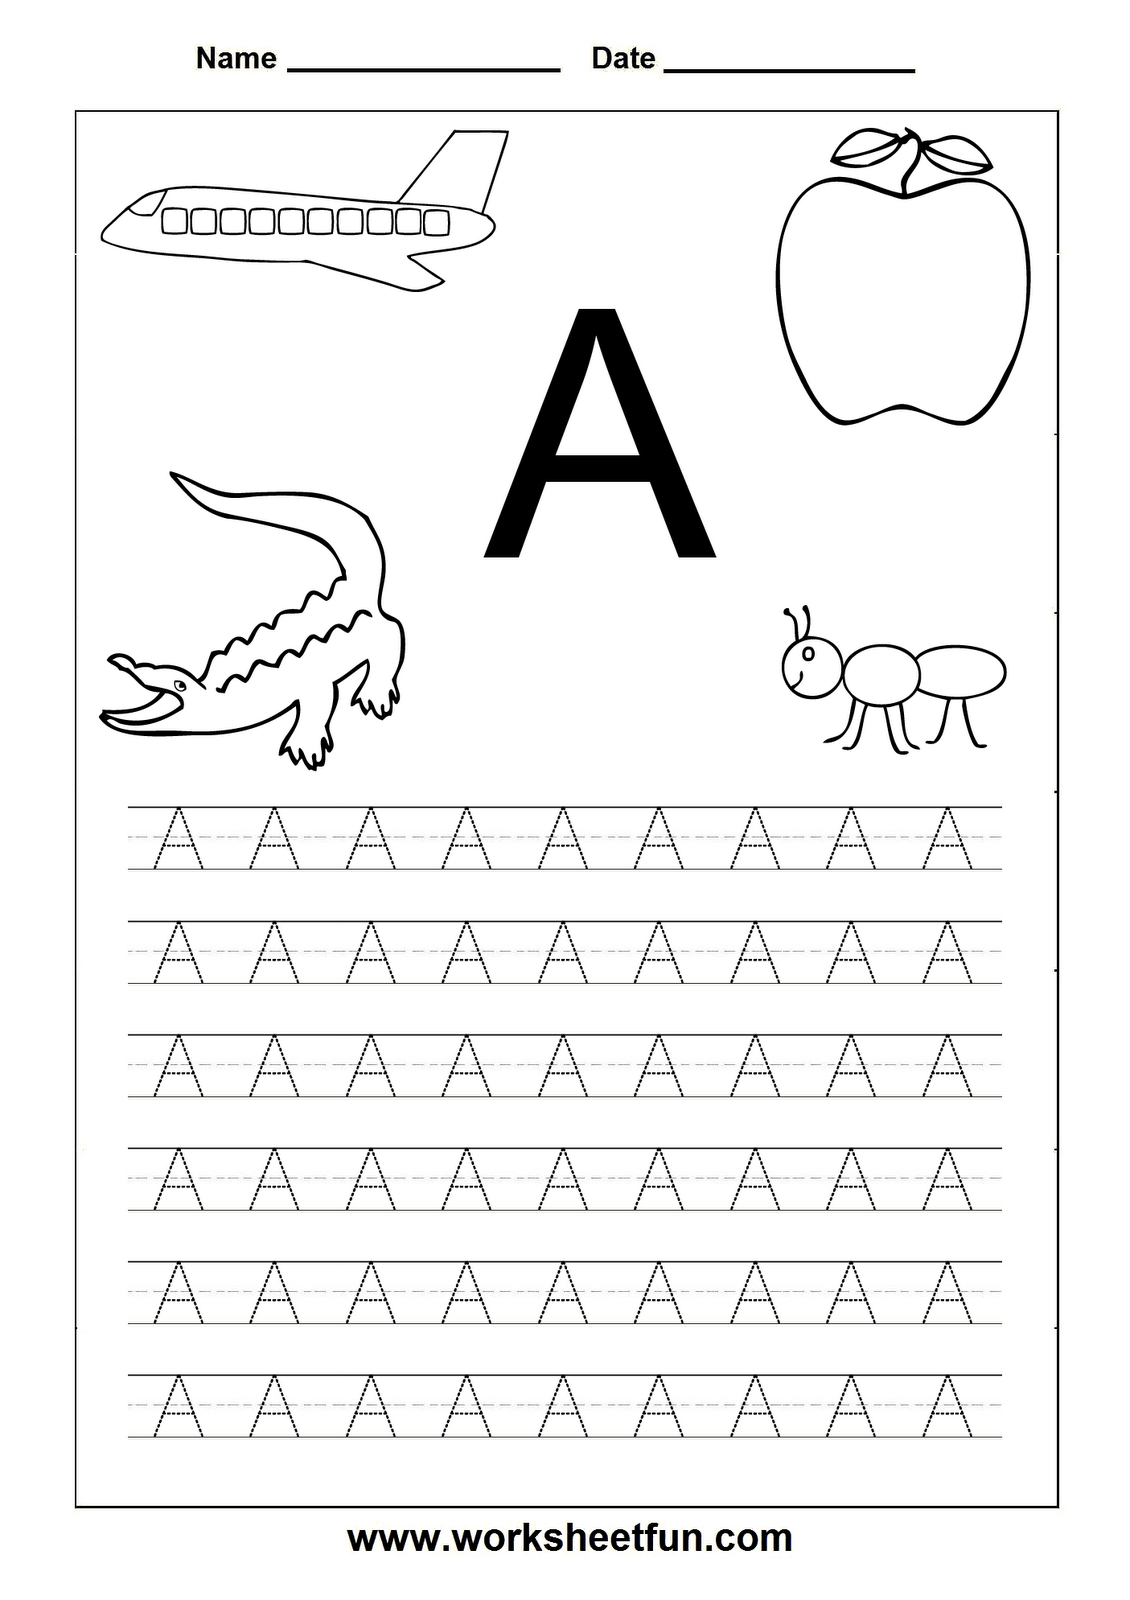 free-abc-worksheets-for-pre-k-activity-shelter